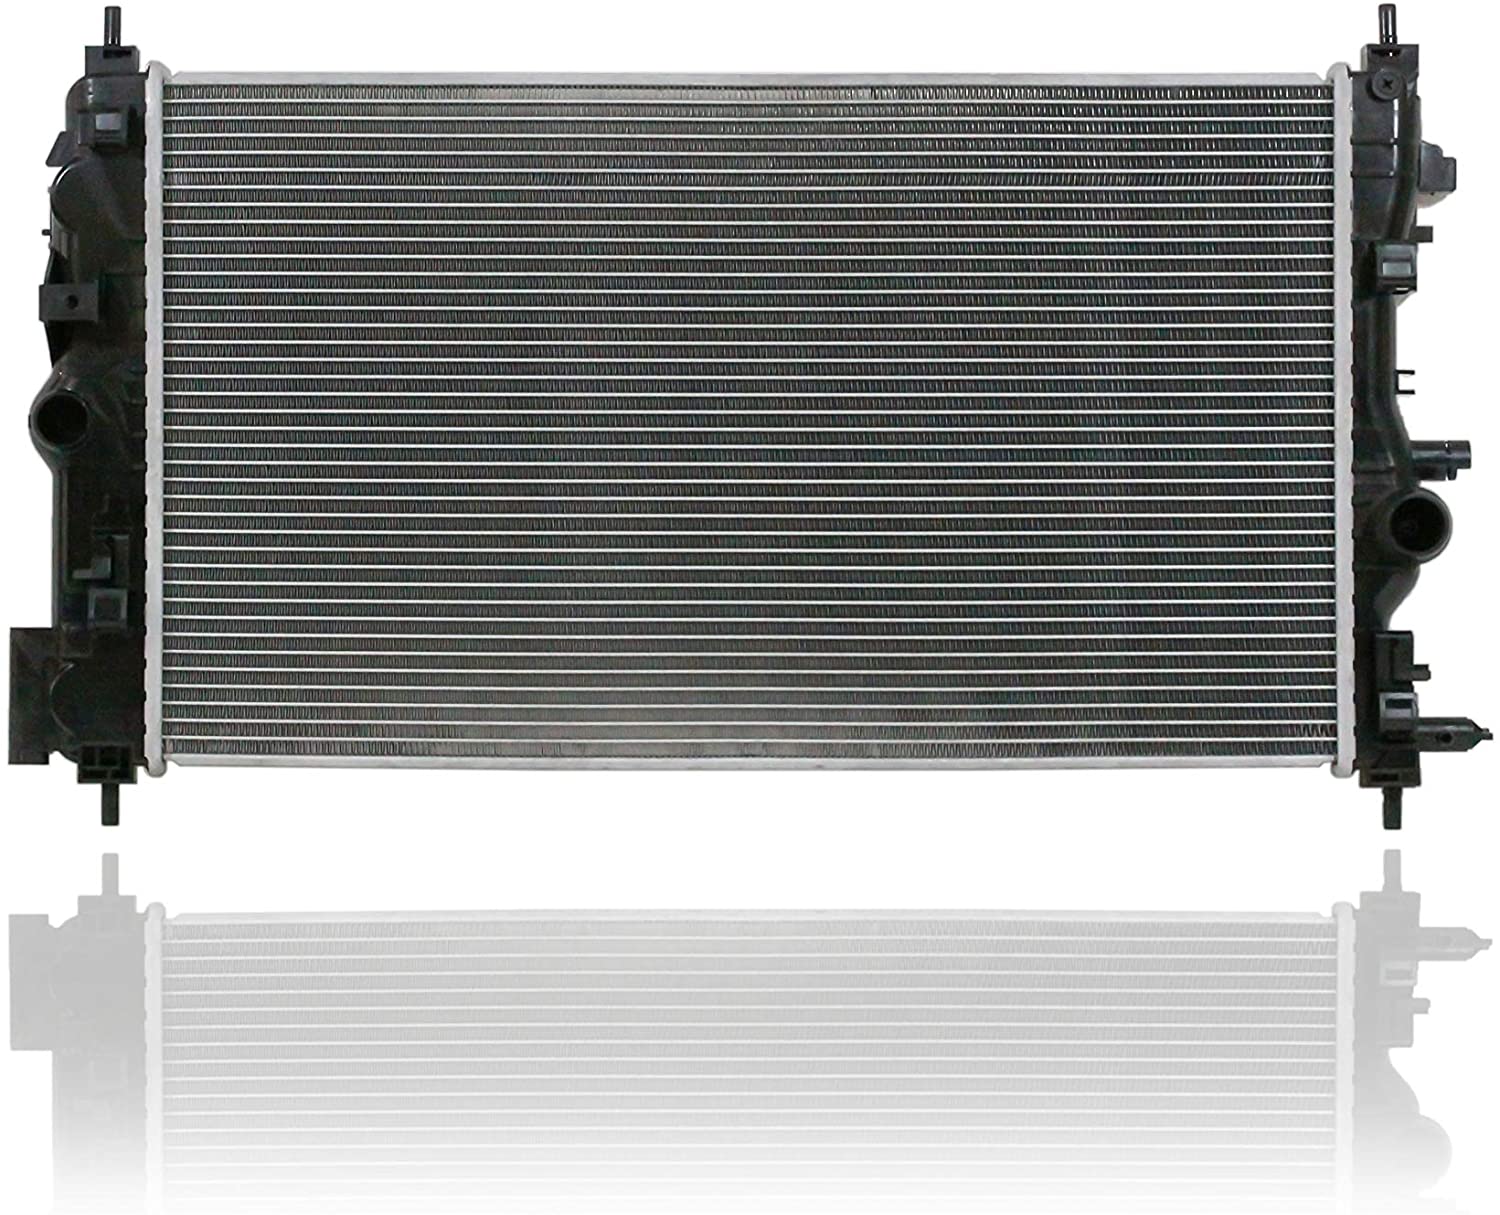 Radiator - PACIFIC BEST INC. For/Fit 13196 11-15 Chevrolet Cruze 16-16 Cruze Limited Manual Tranmission 1.4L Plastic Tank, Aluminum Core